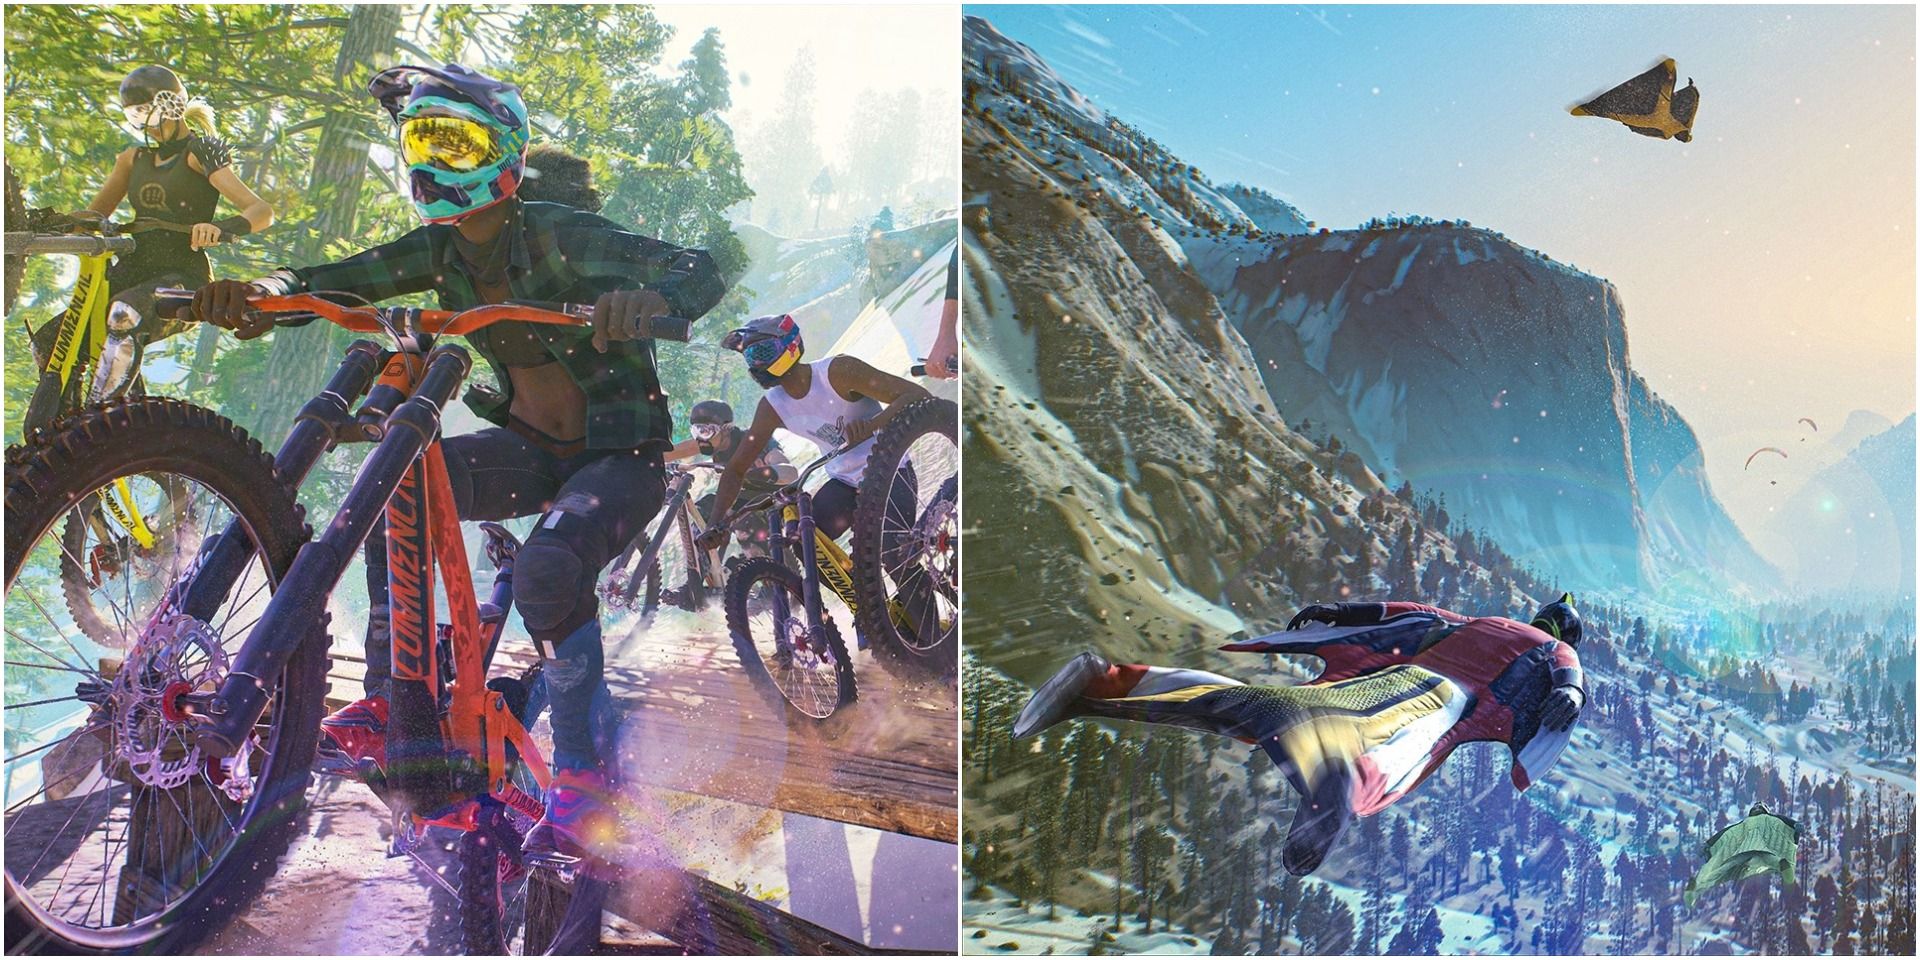 A collage depicting gameplay in Riders Republic